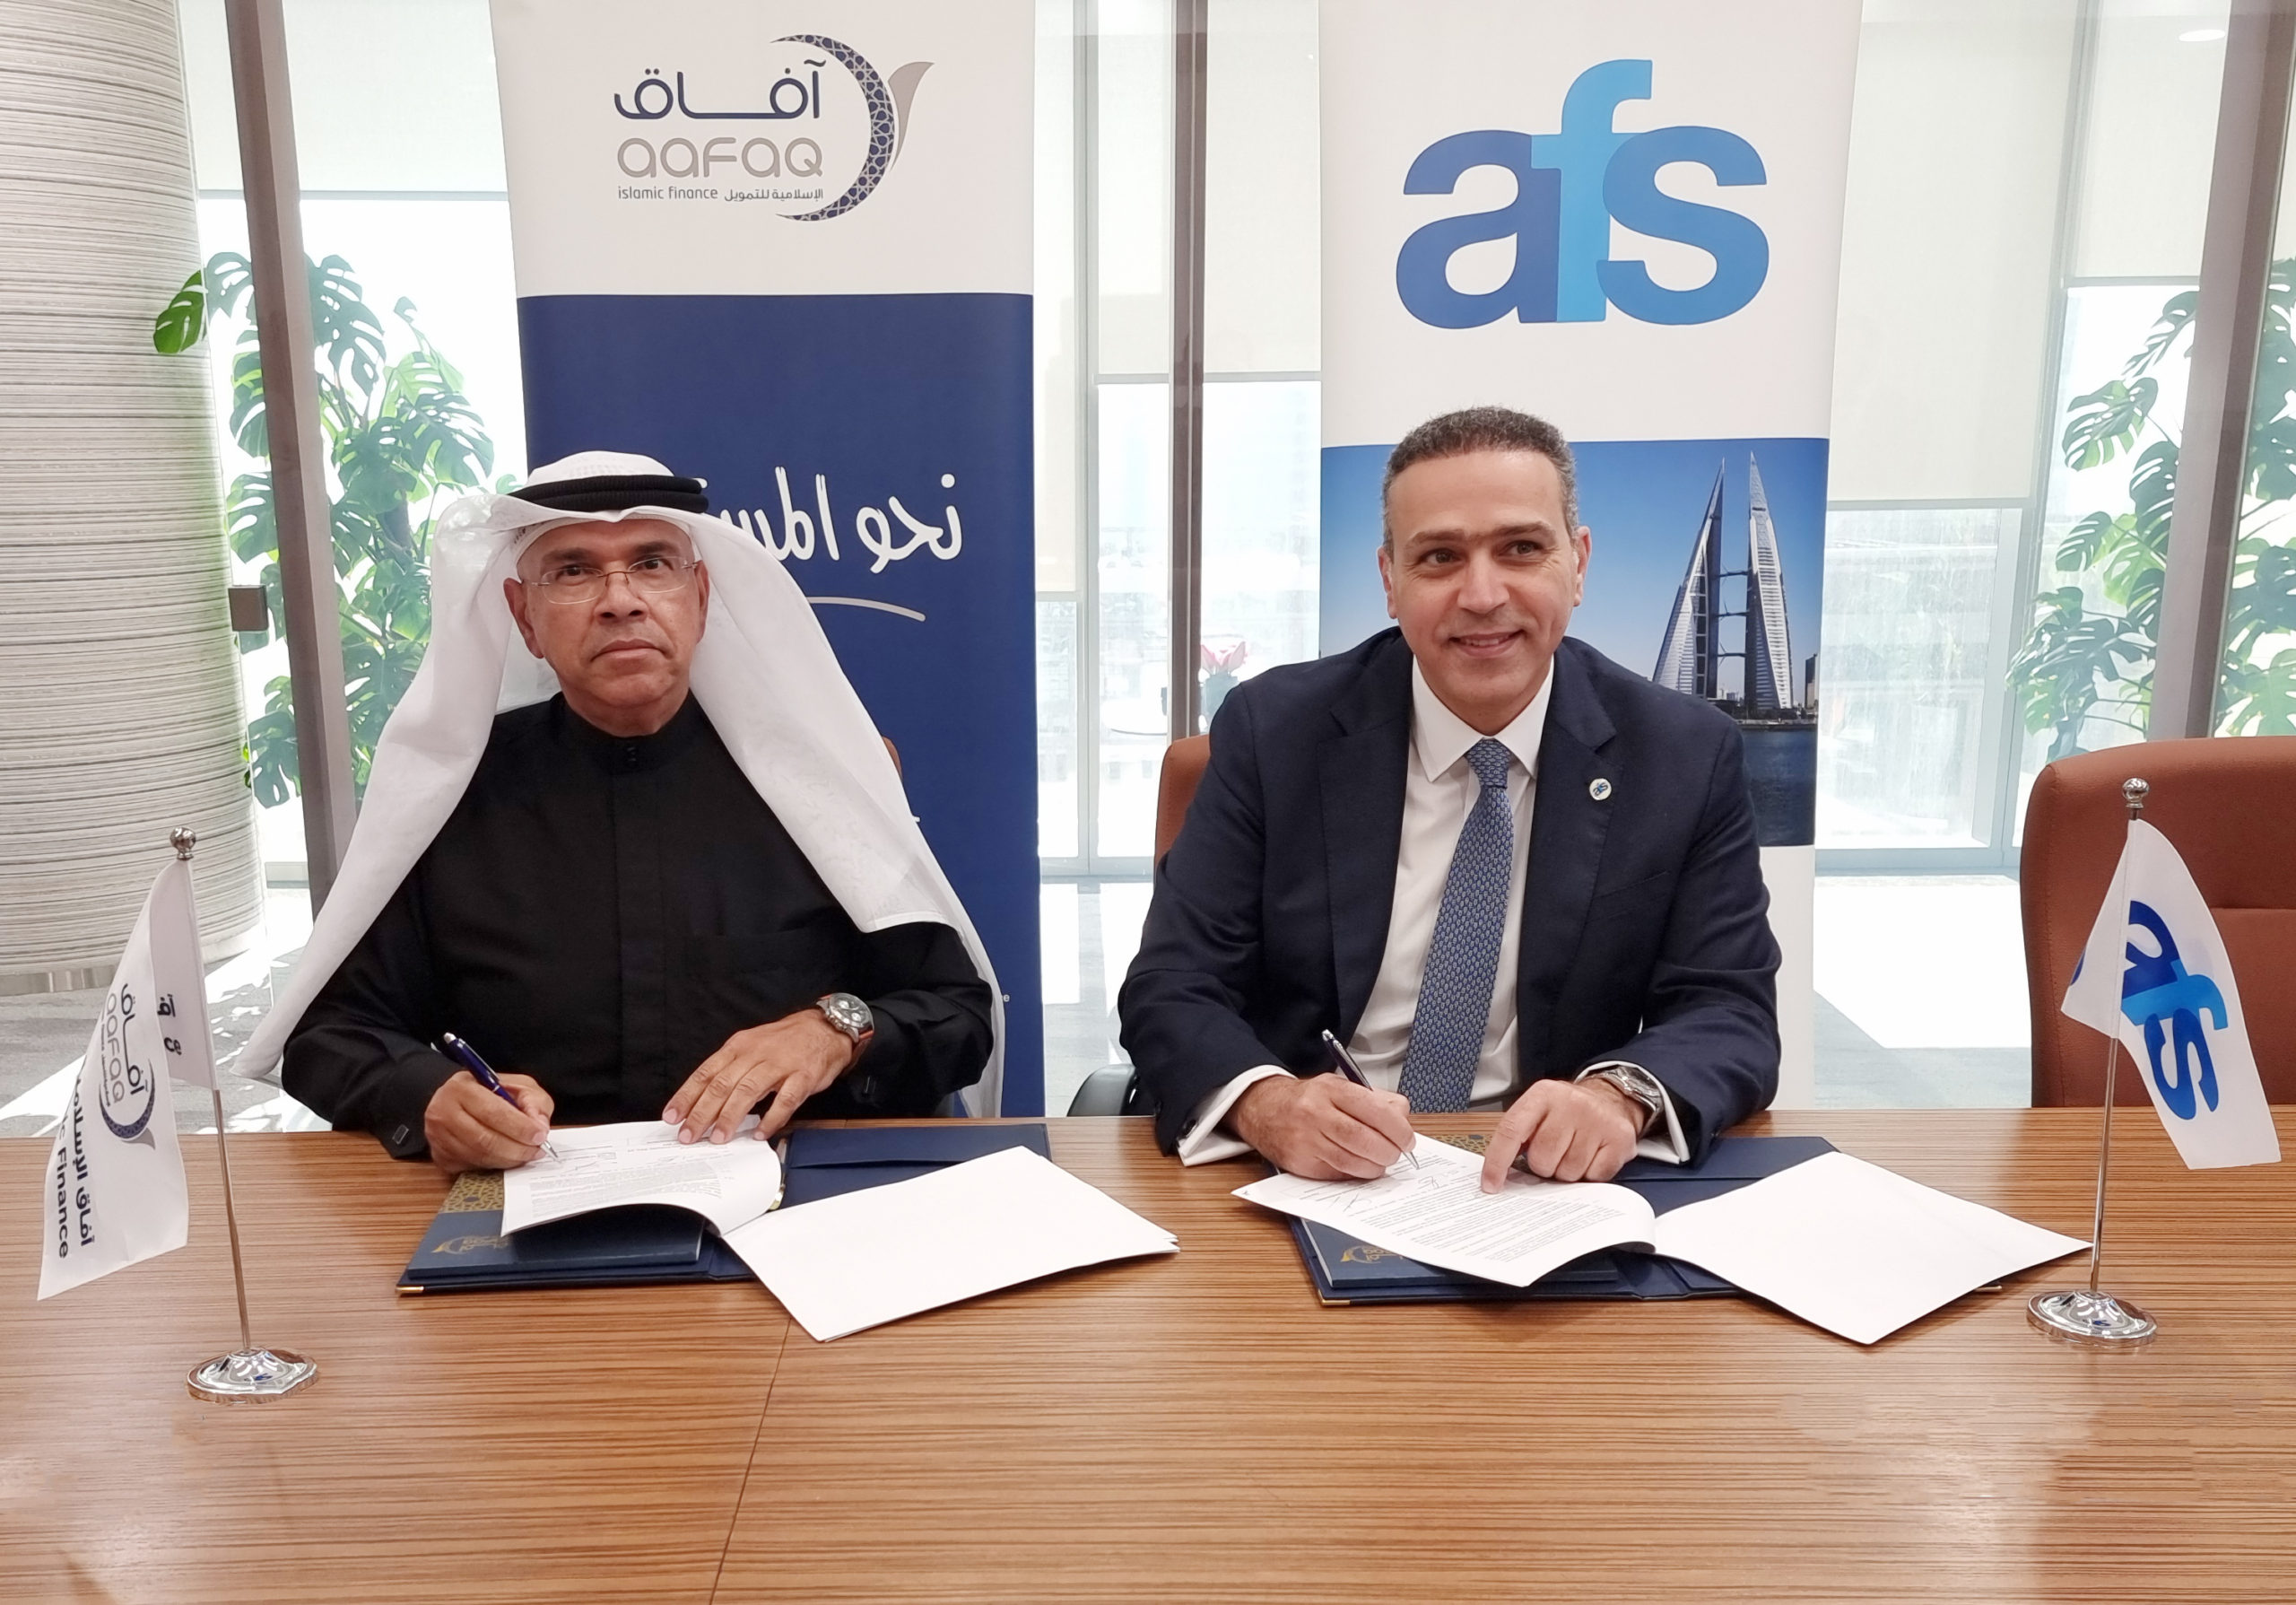 Aafaq Islamic Finance and Arab Financial Services Partner to Support Fintech Startups